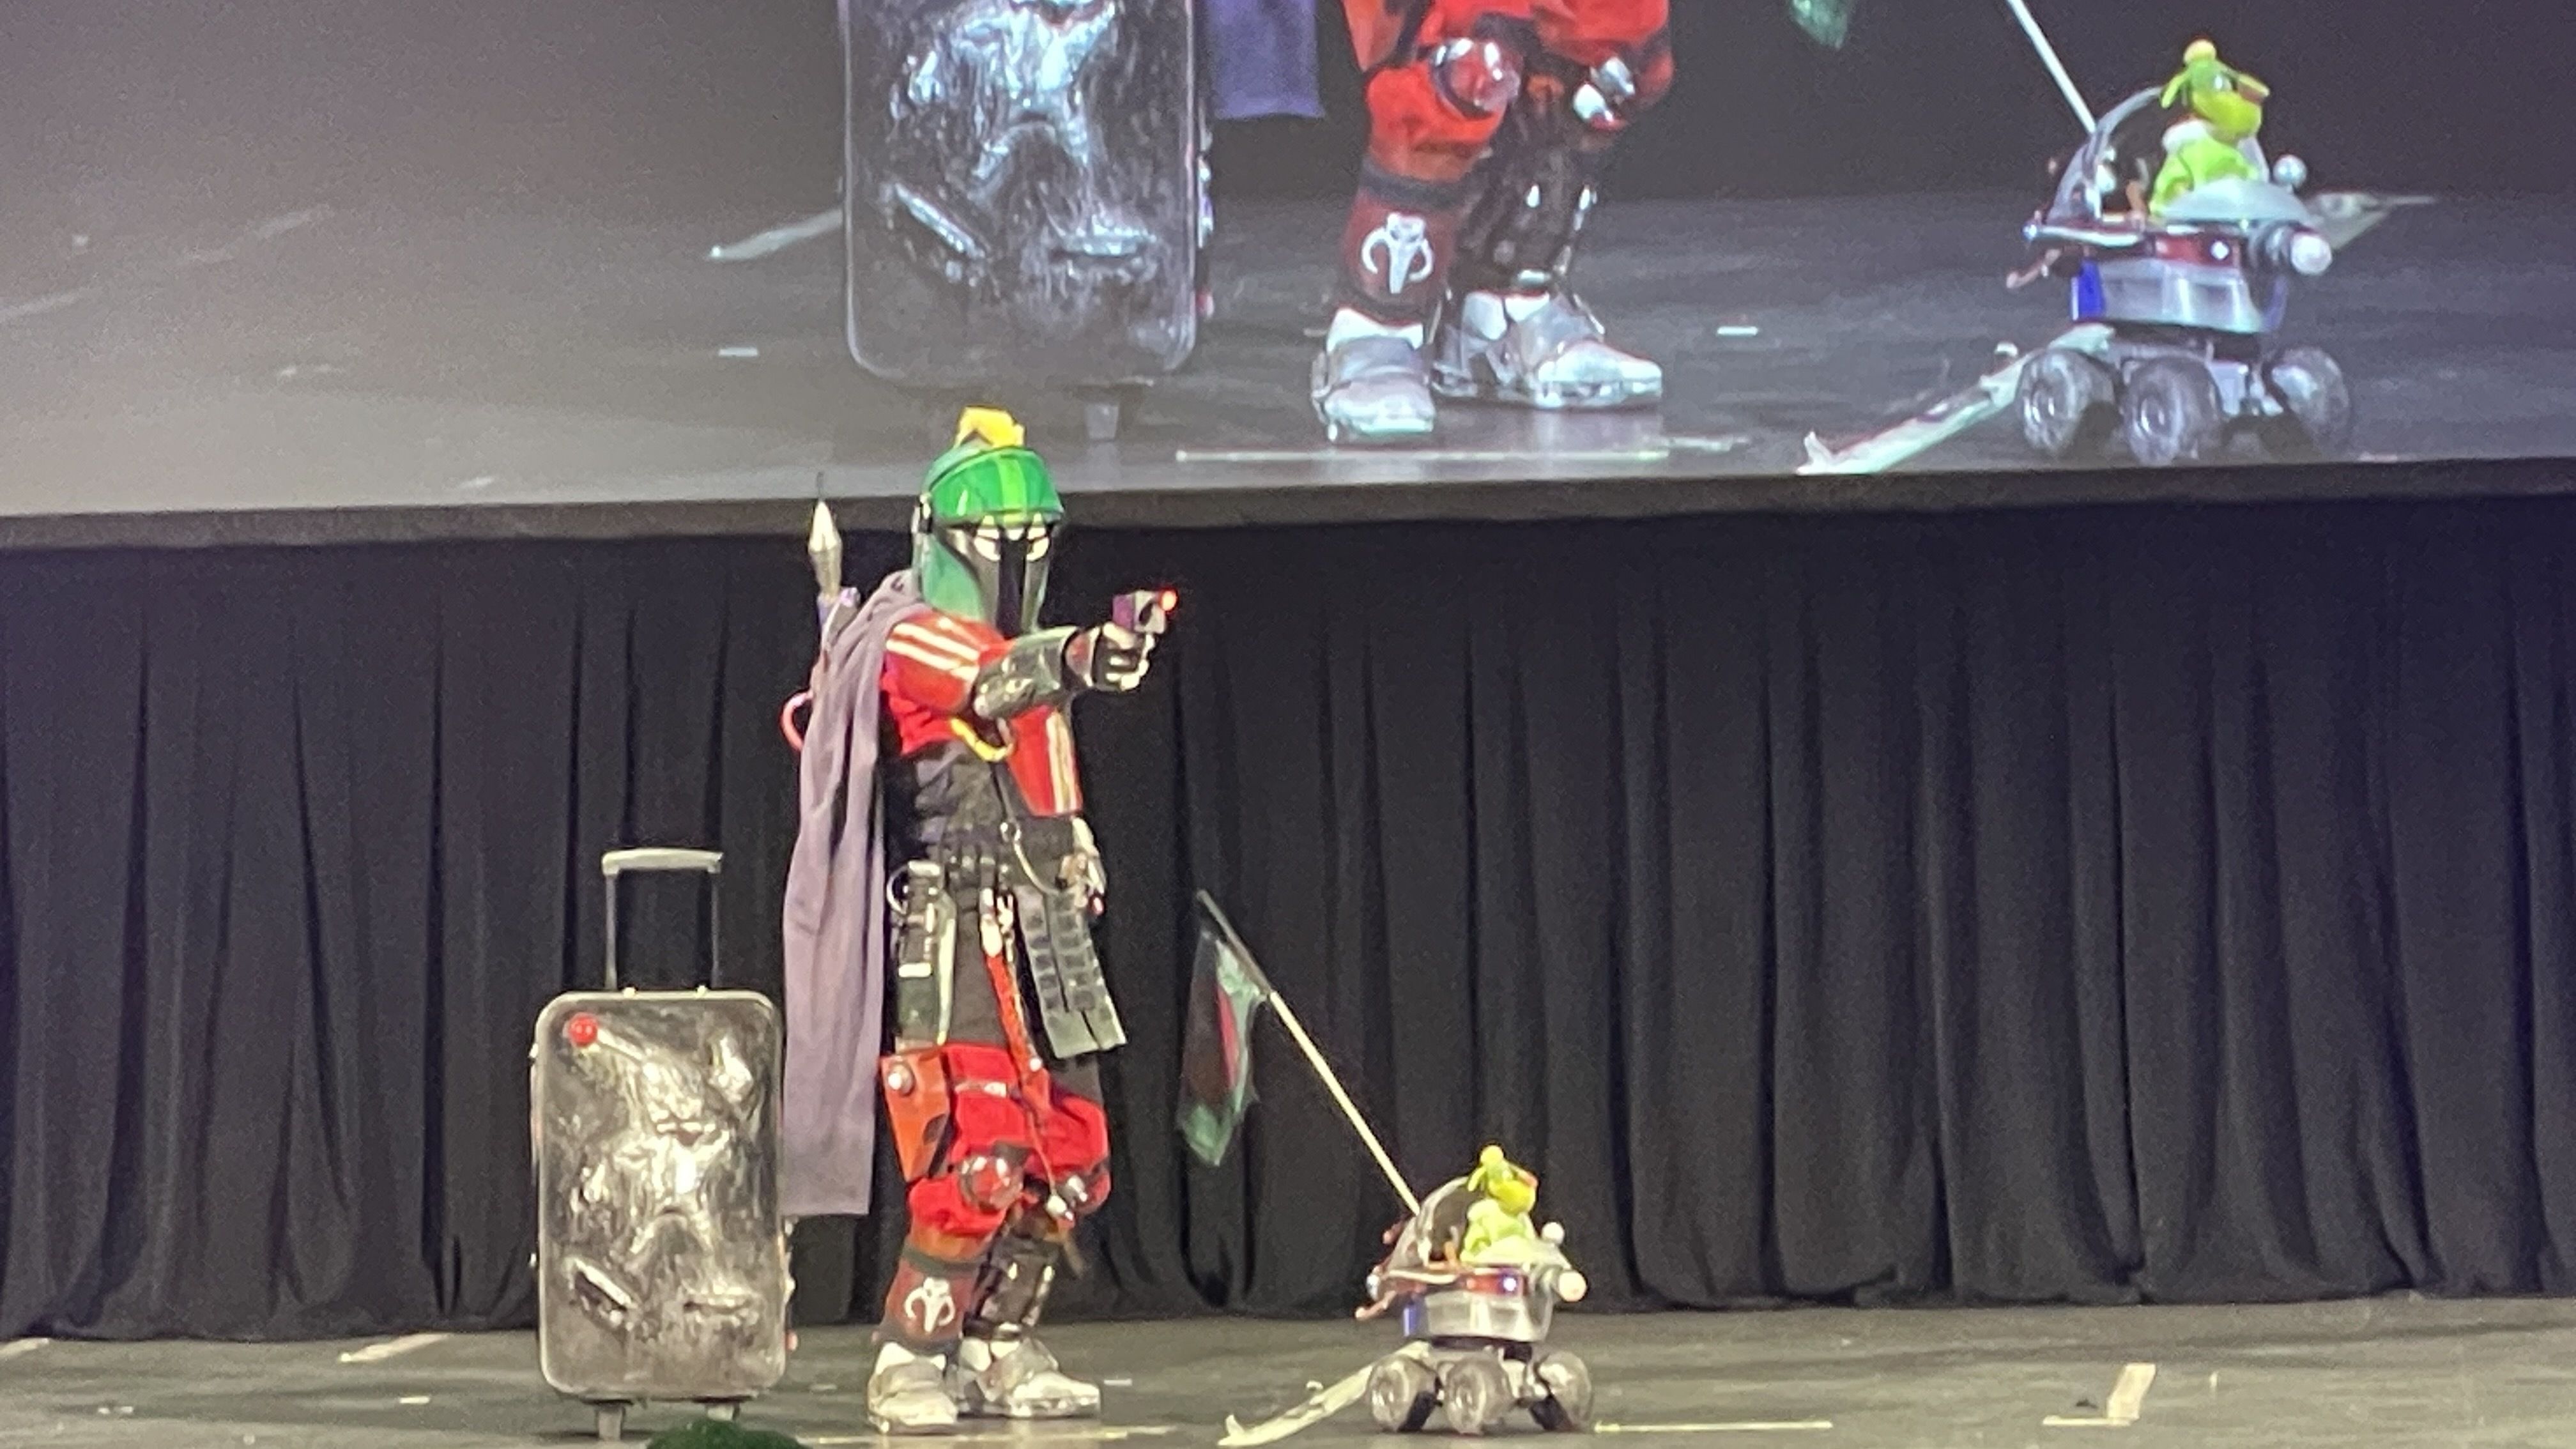 The "Marvin the Mandalorian" cosplay combined the "Looney Tunes" character  Marvin the Martian with "The Mandalorian Star" Wars protagonist.